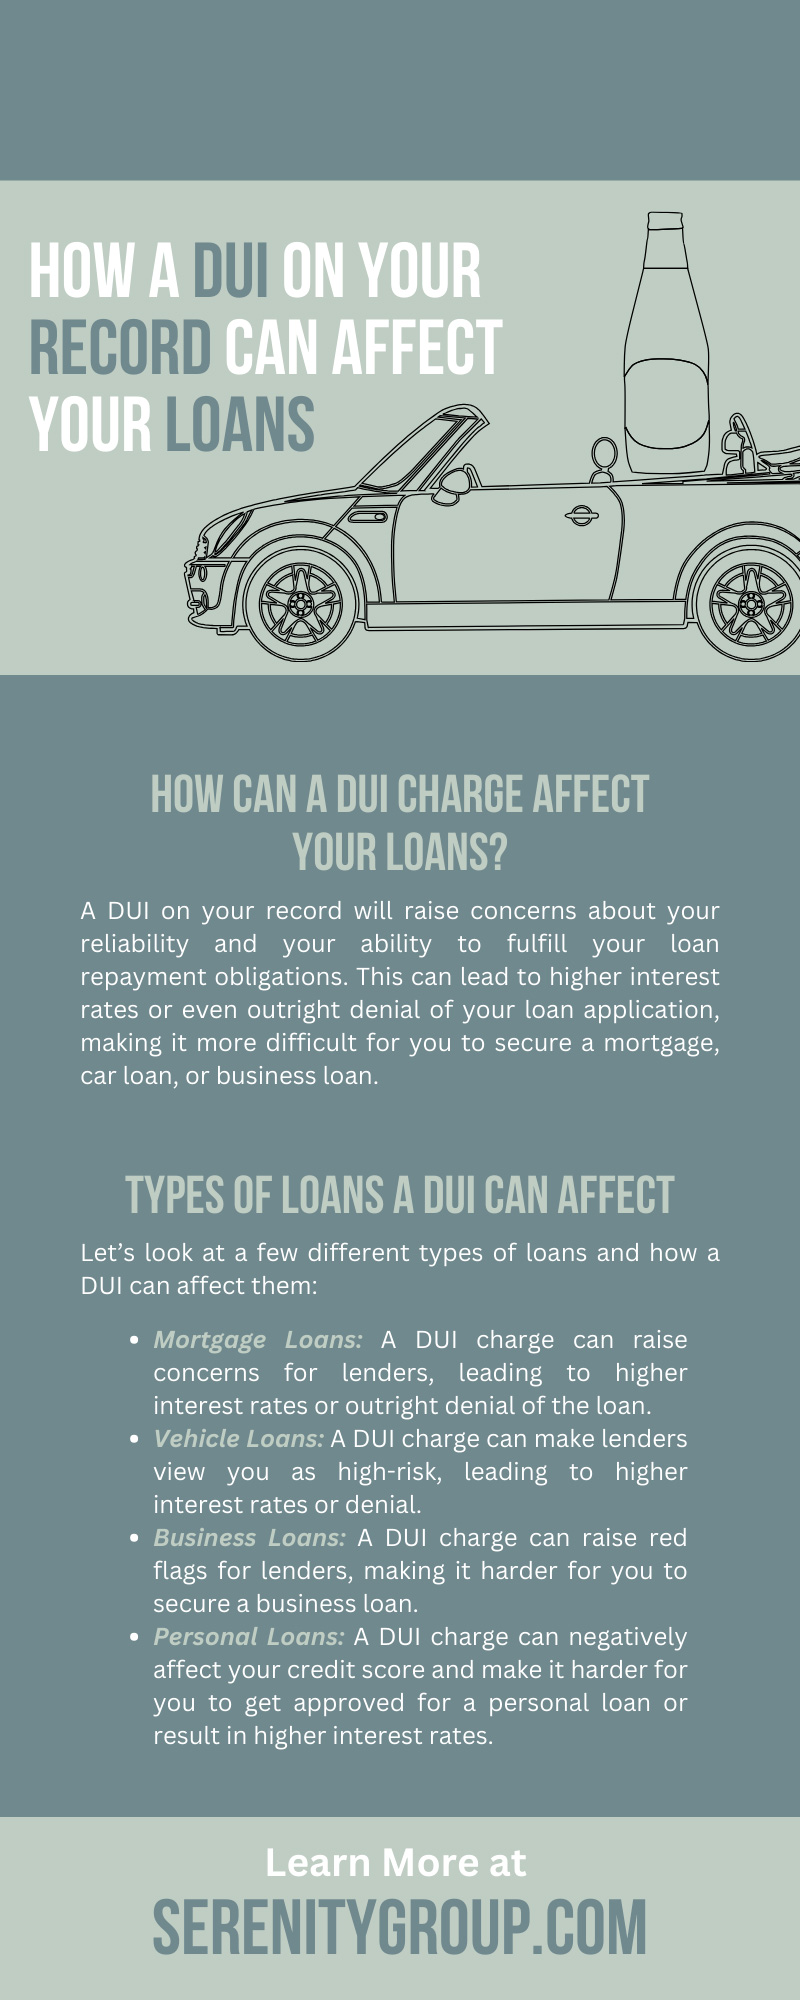 How a DUI on Your Record Can Affect Your Loans